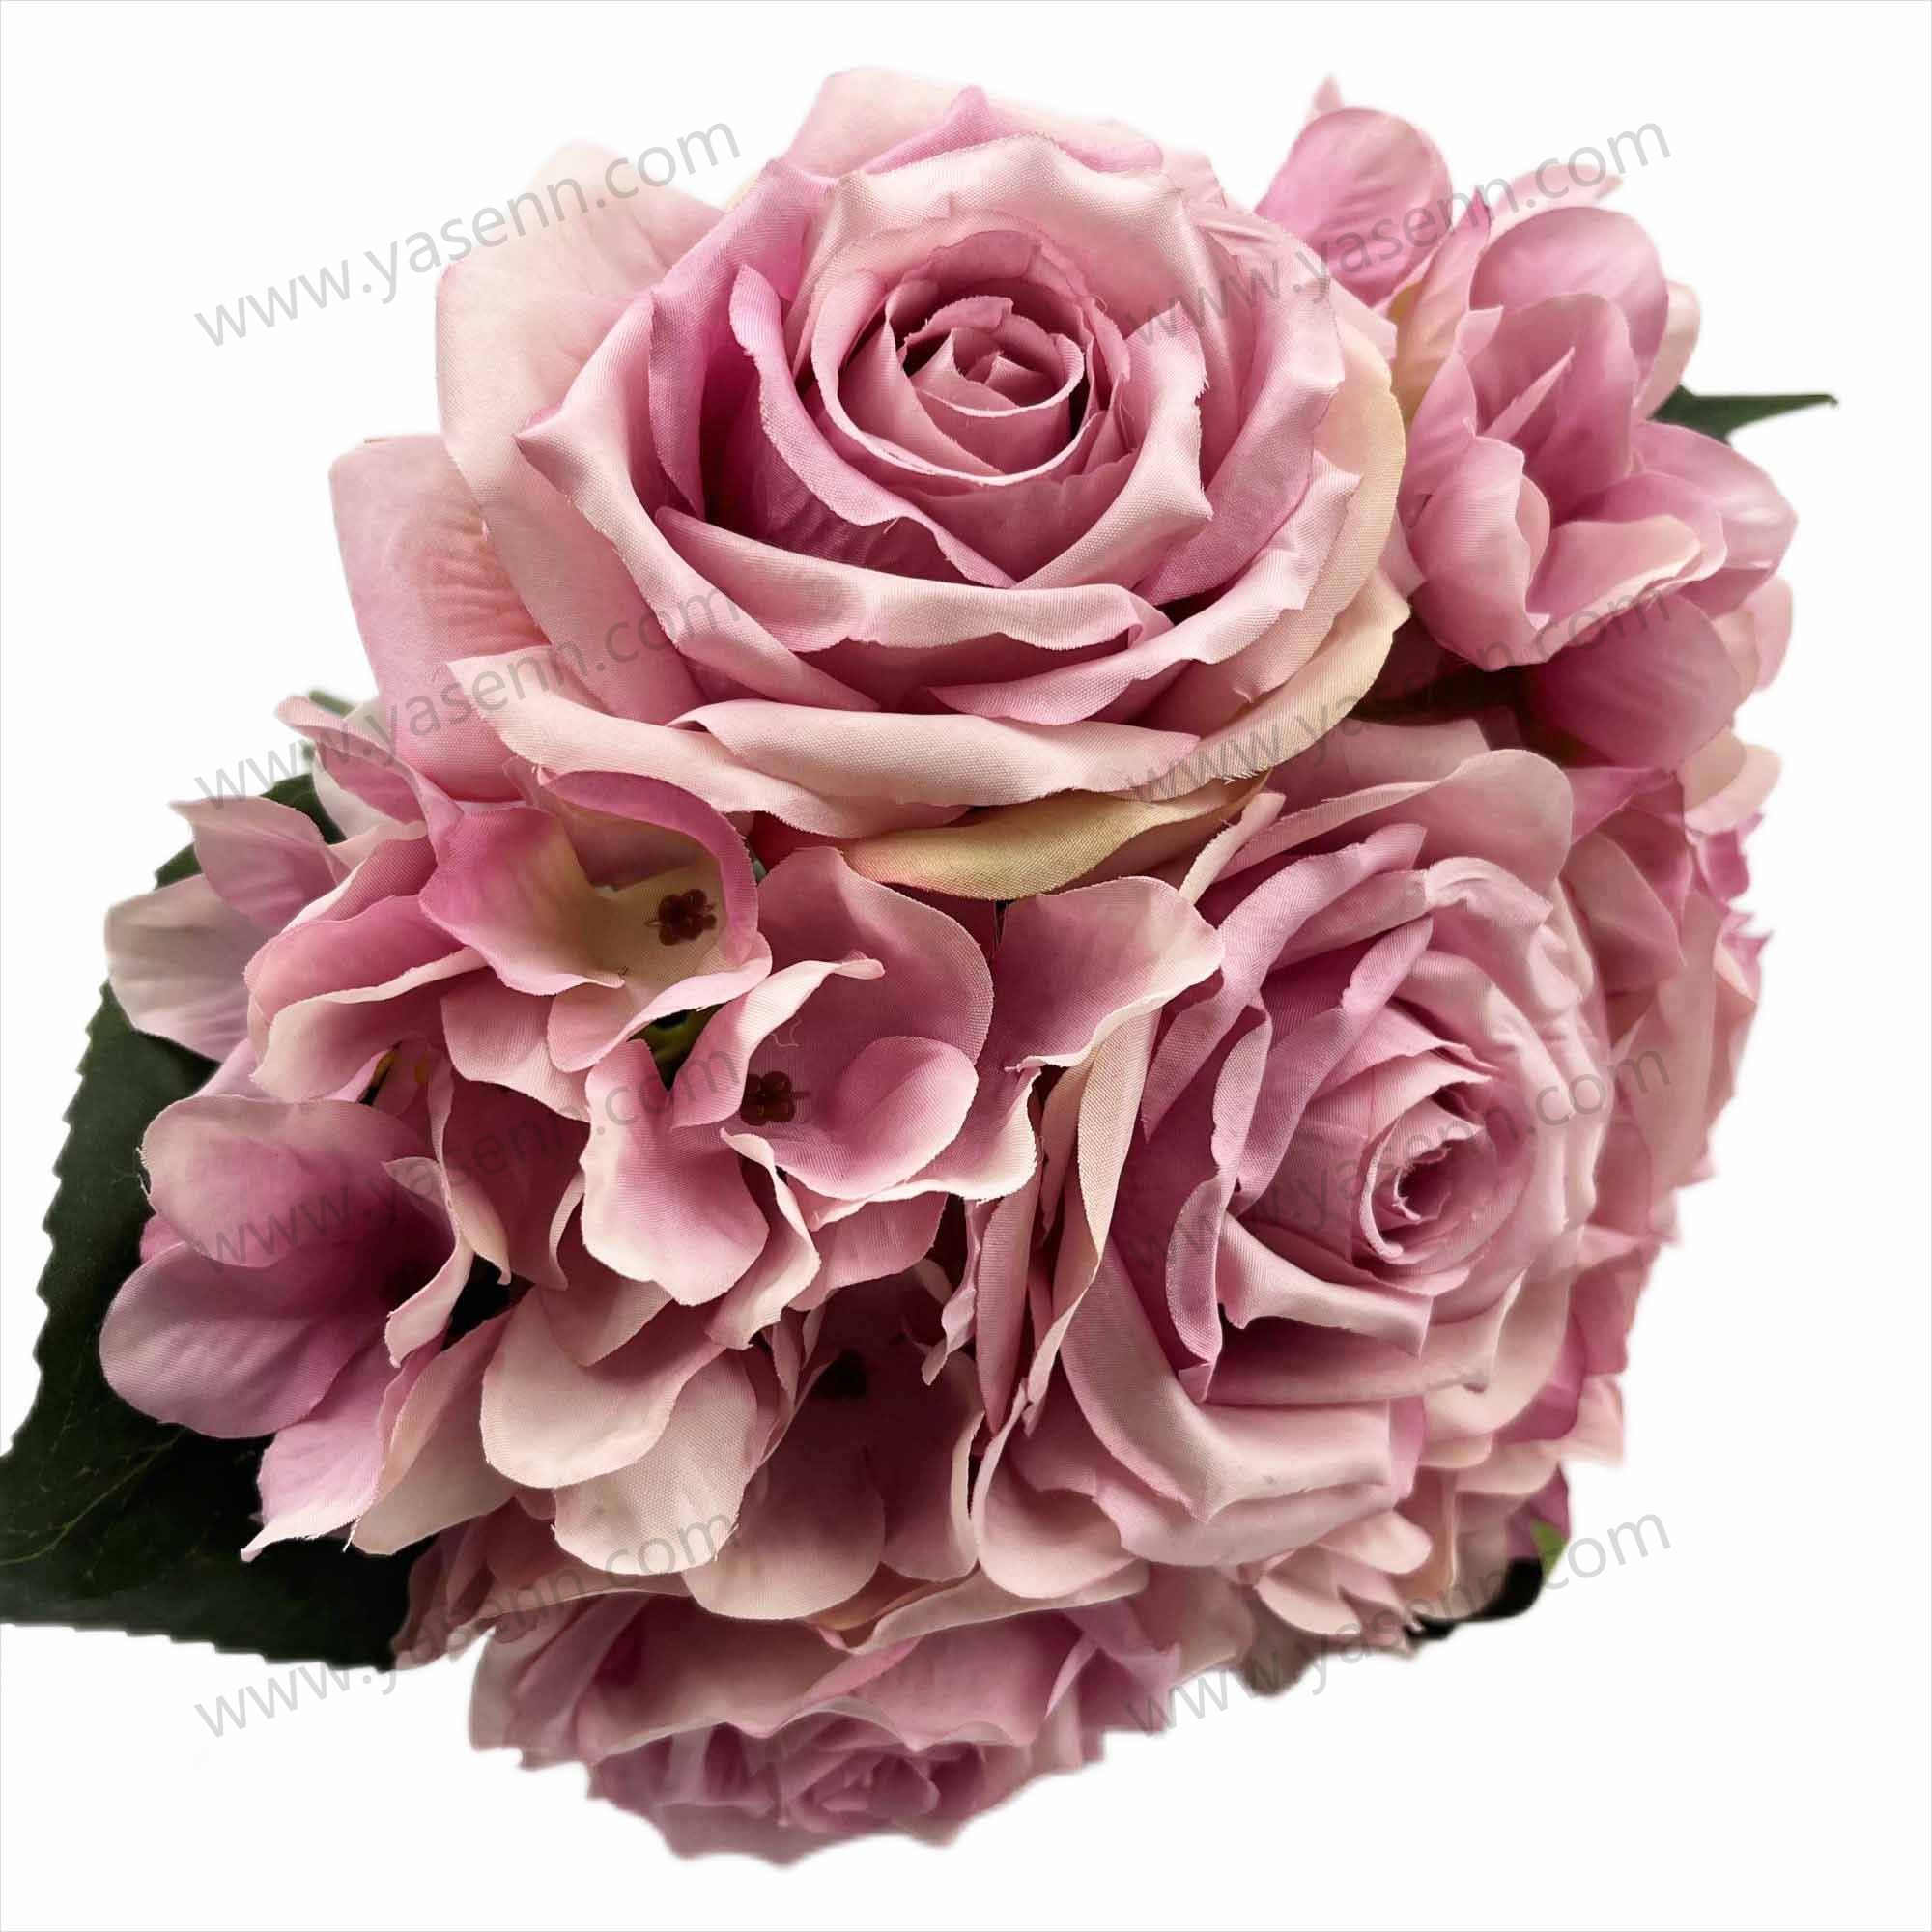 7 BRANCHES ROSE HYDRANGEA YSB23134 bridal boutuet artificial flowers